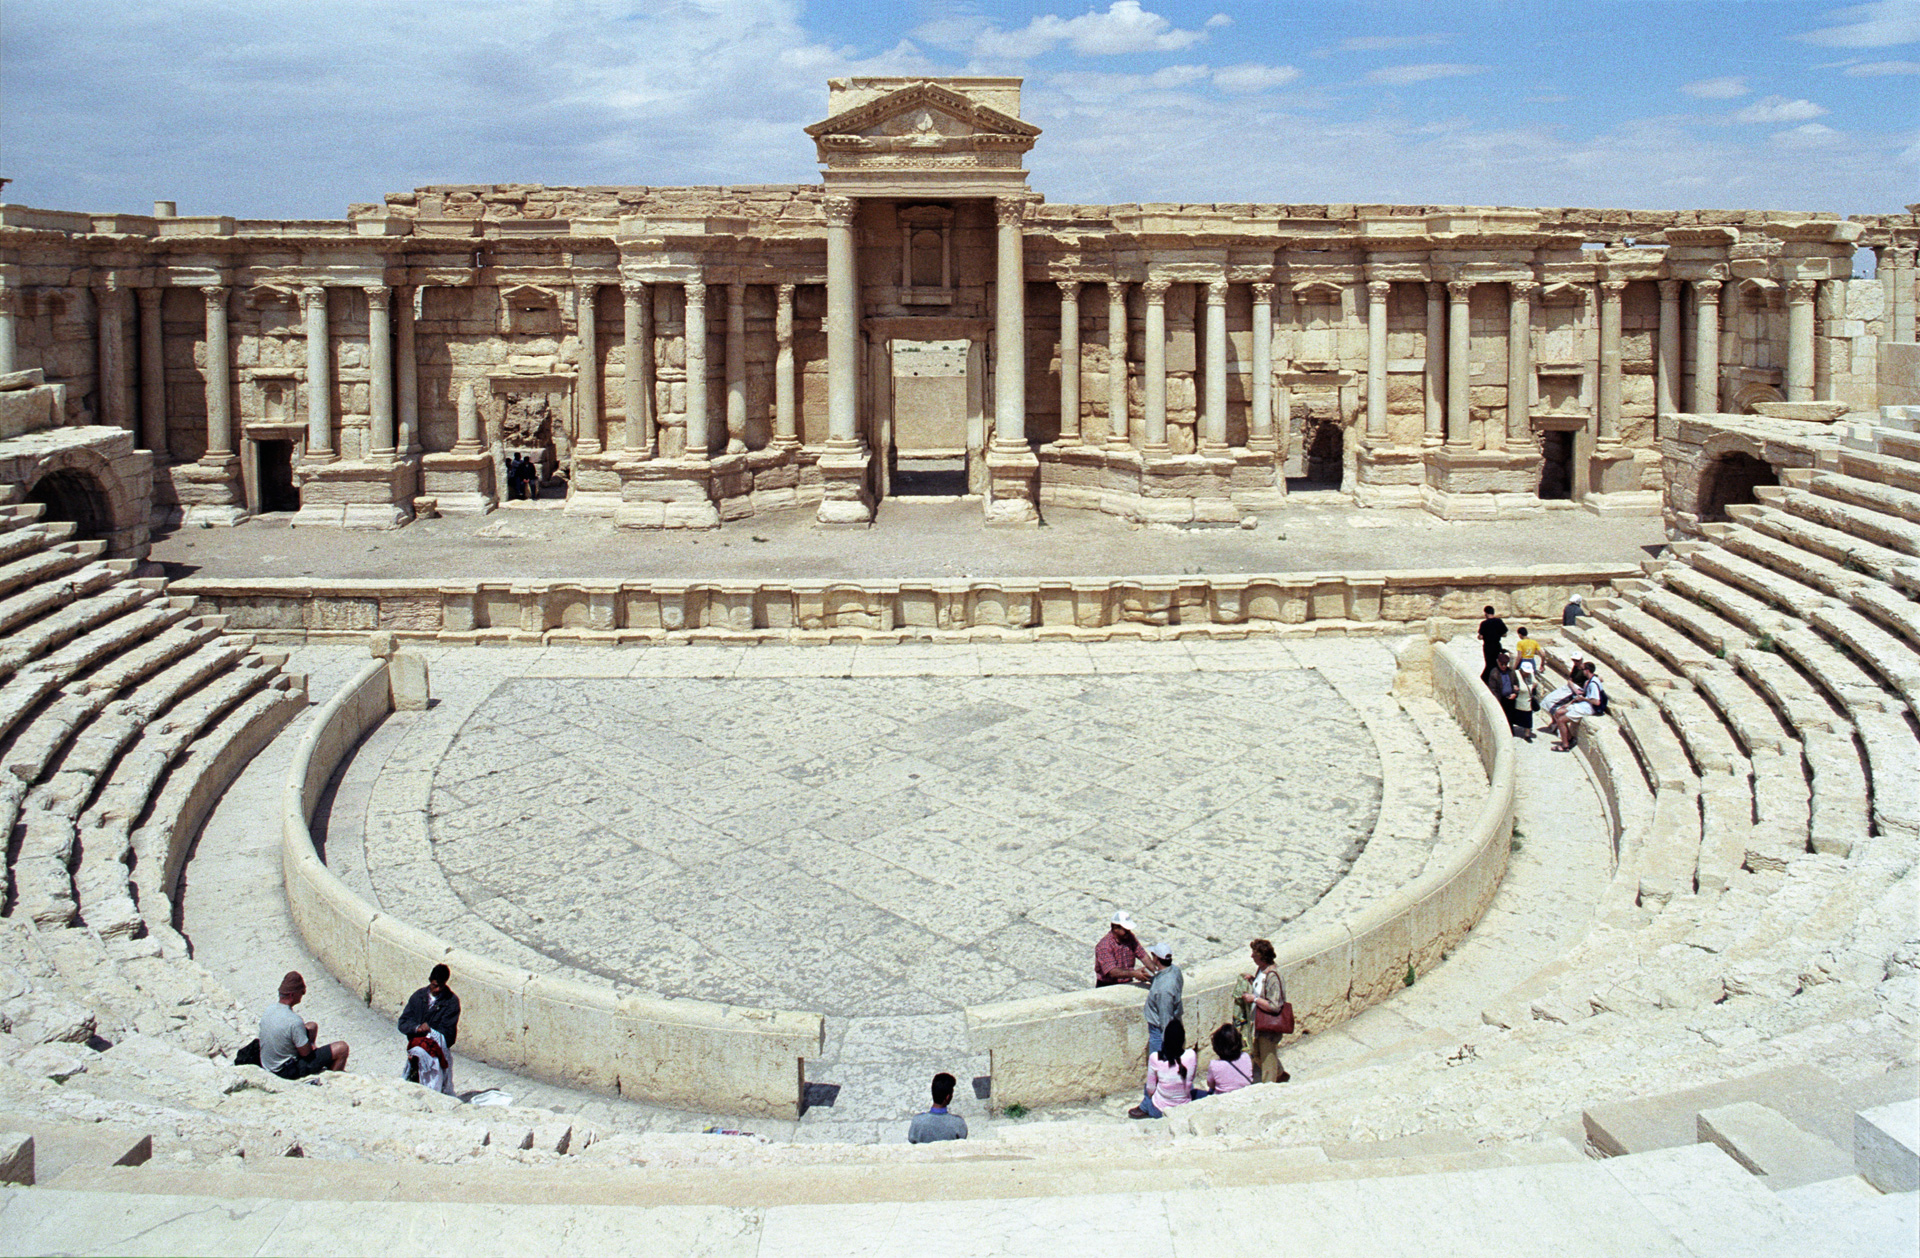 The ancient theatre in Palmyra